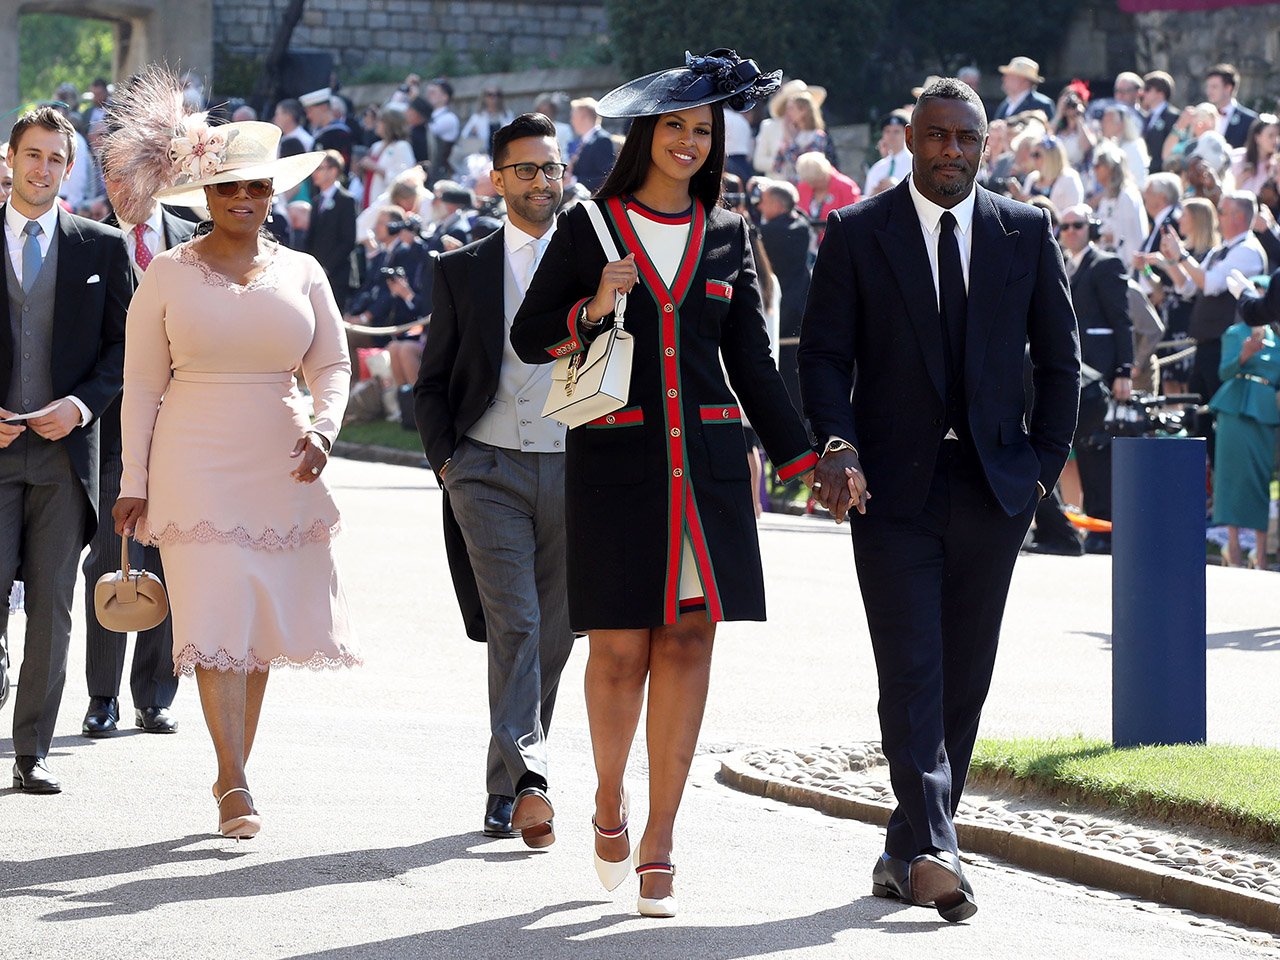 Idris Elba and Sabrina Dhowre followed by Oprah Winfrey at the royal wedding of Meghan Markle and Prince Harry